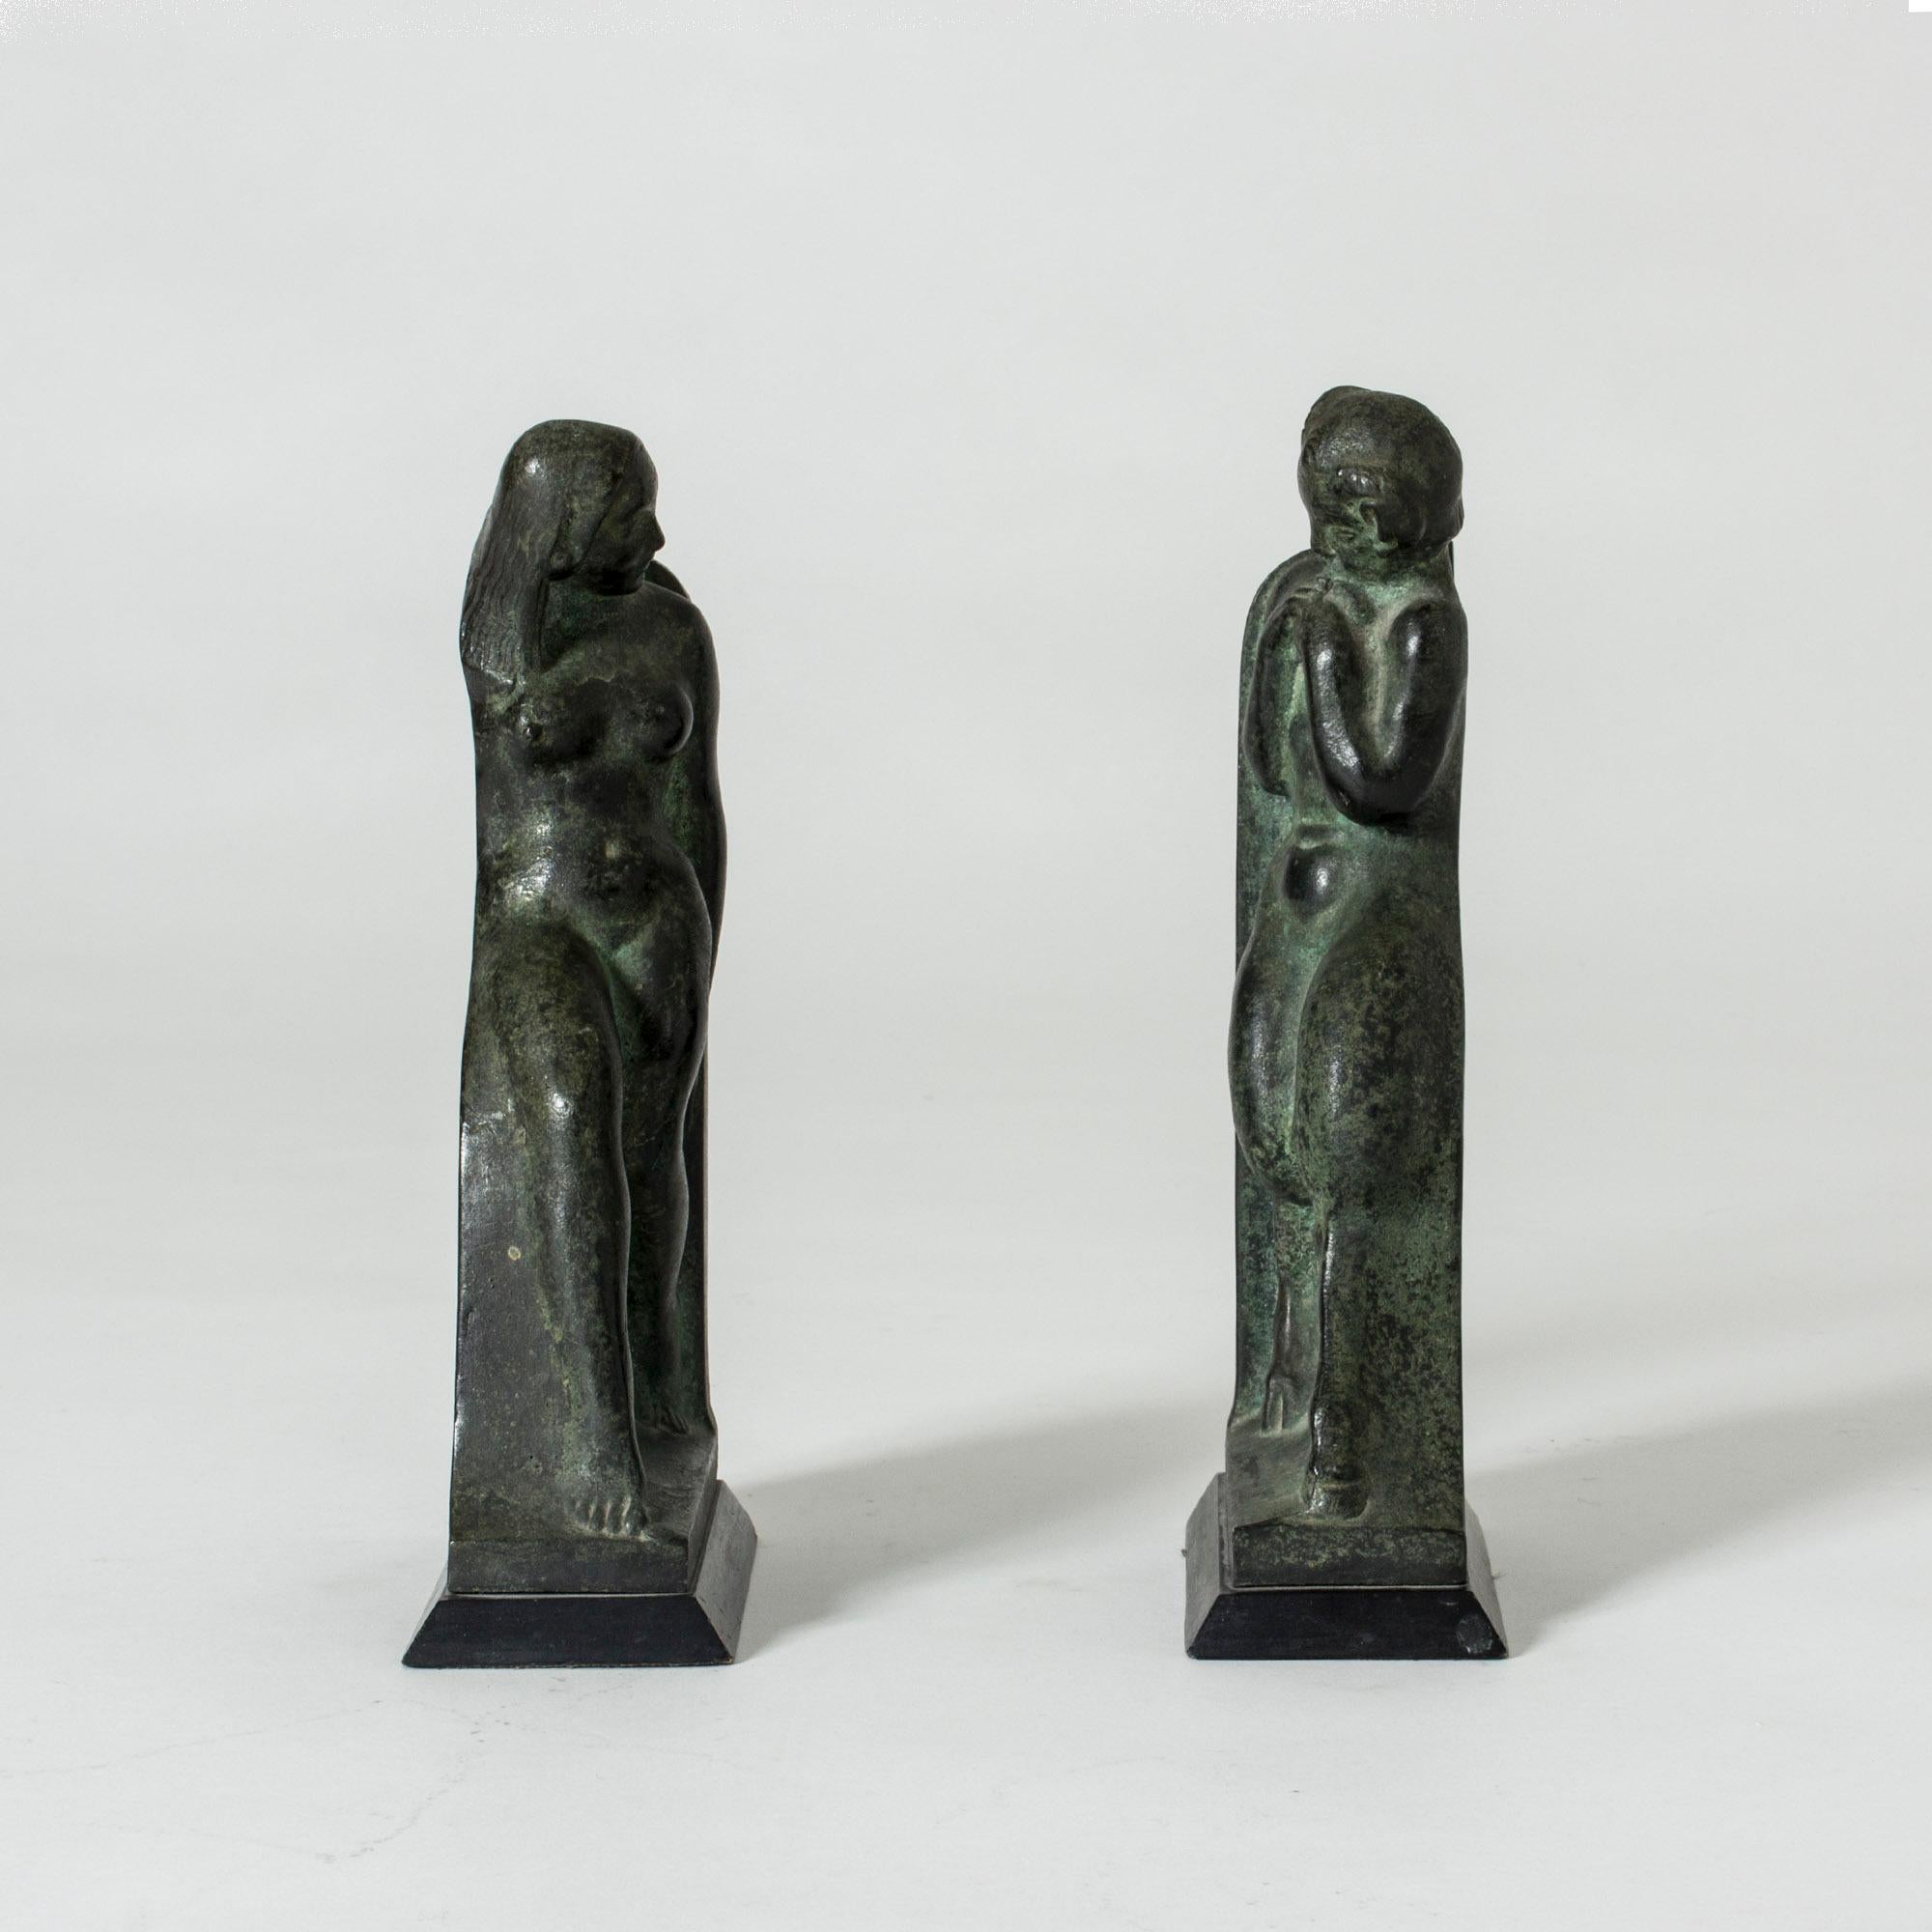 Swedish Pair of Bronze Bookends from 1919 by Axel Gute